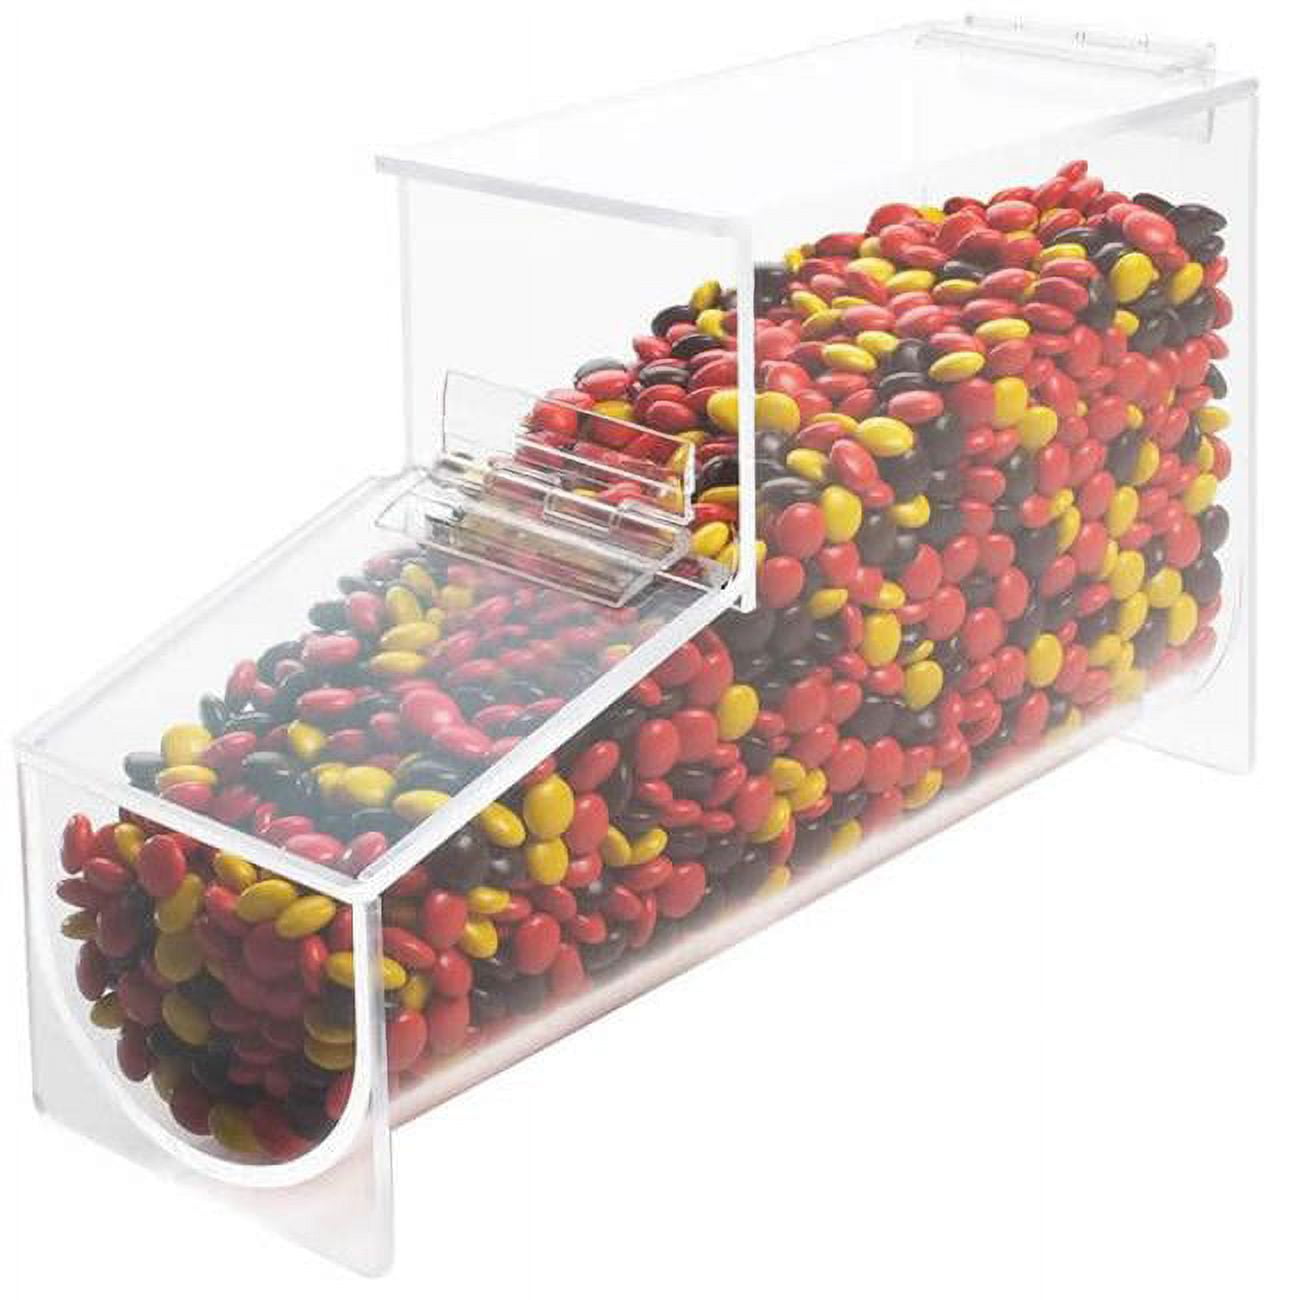 1739 Classic Acrylic Topping Dispenser - 4.125 X 12 X 7 In.